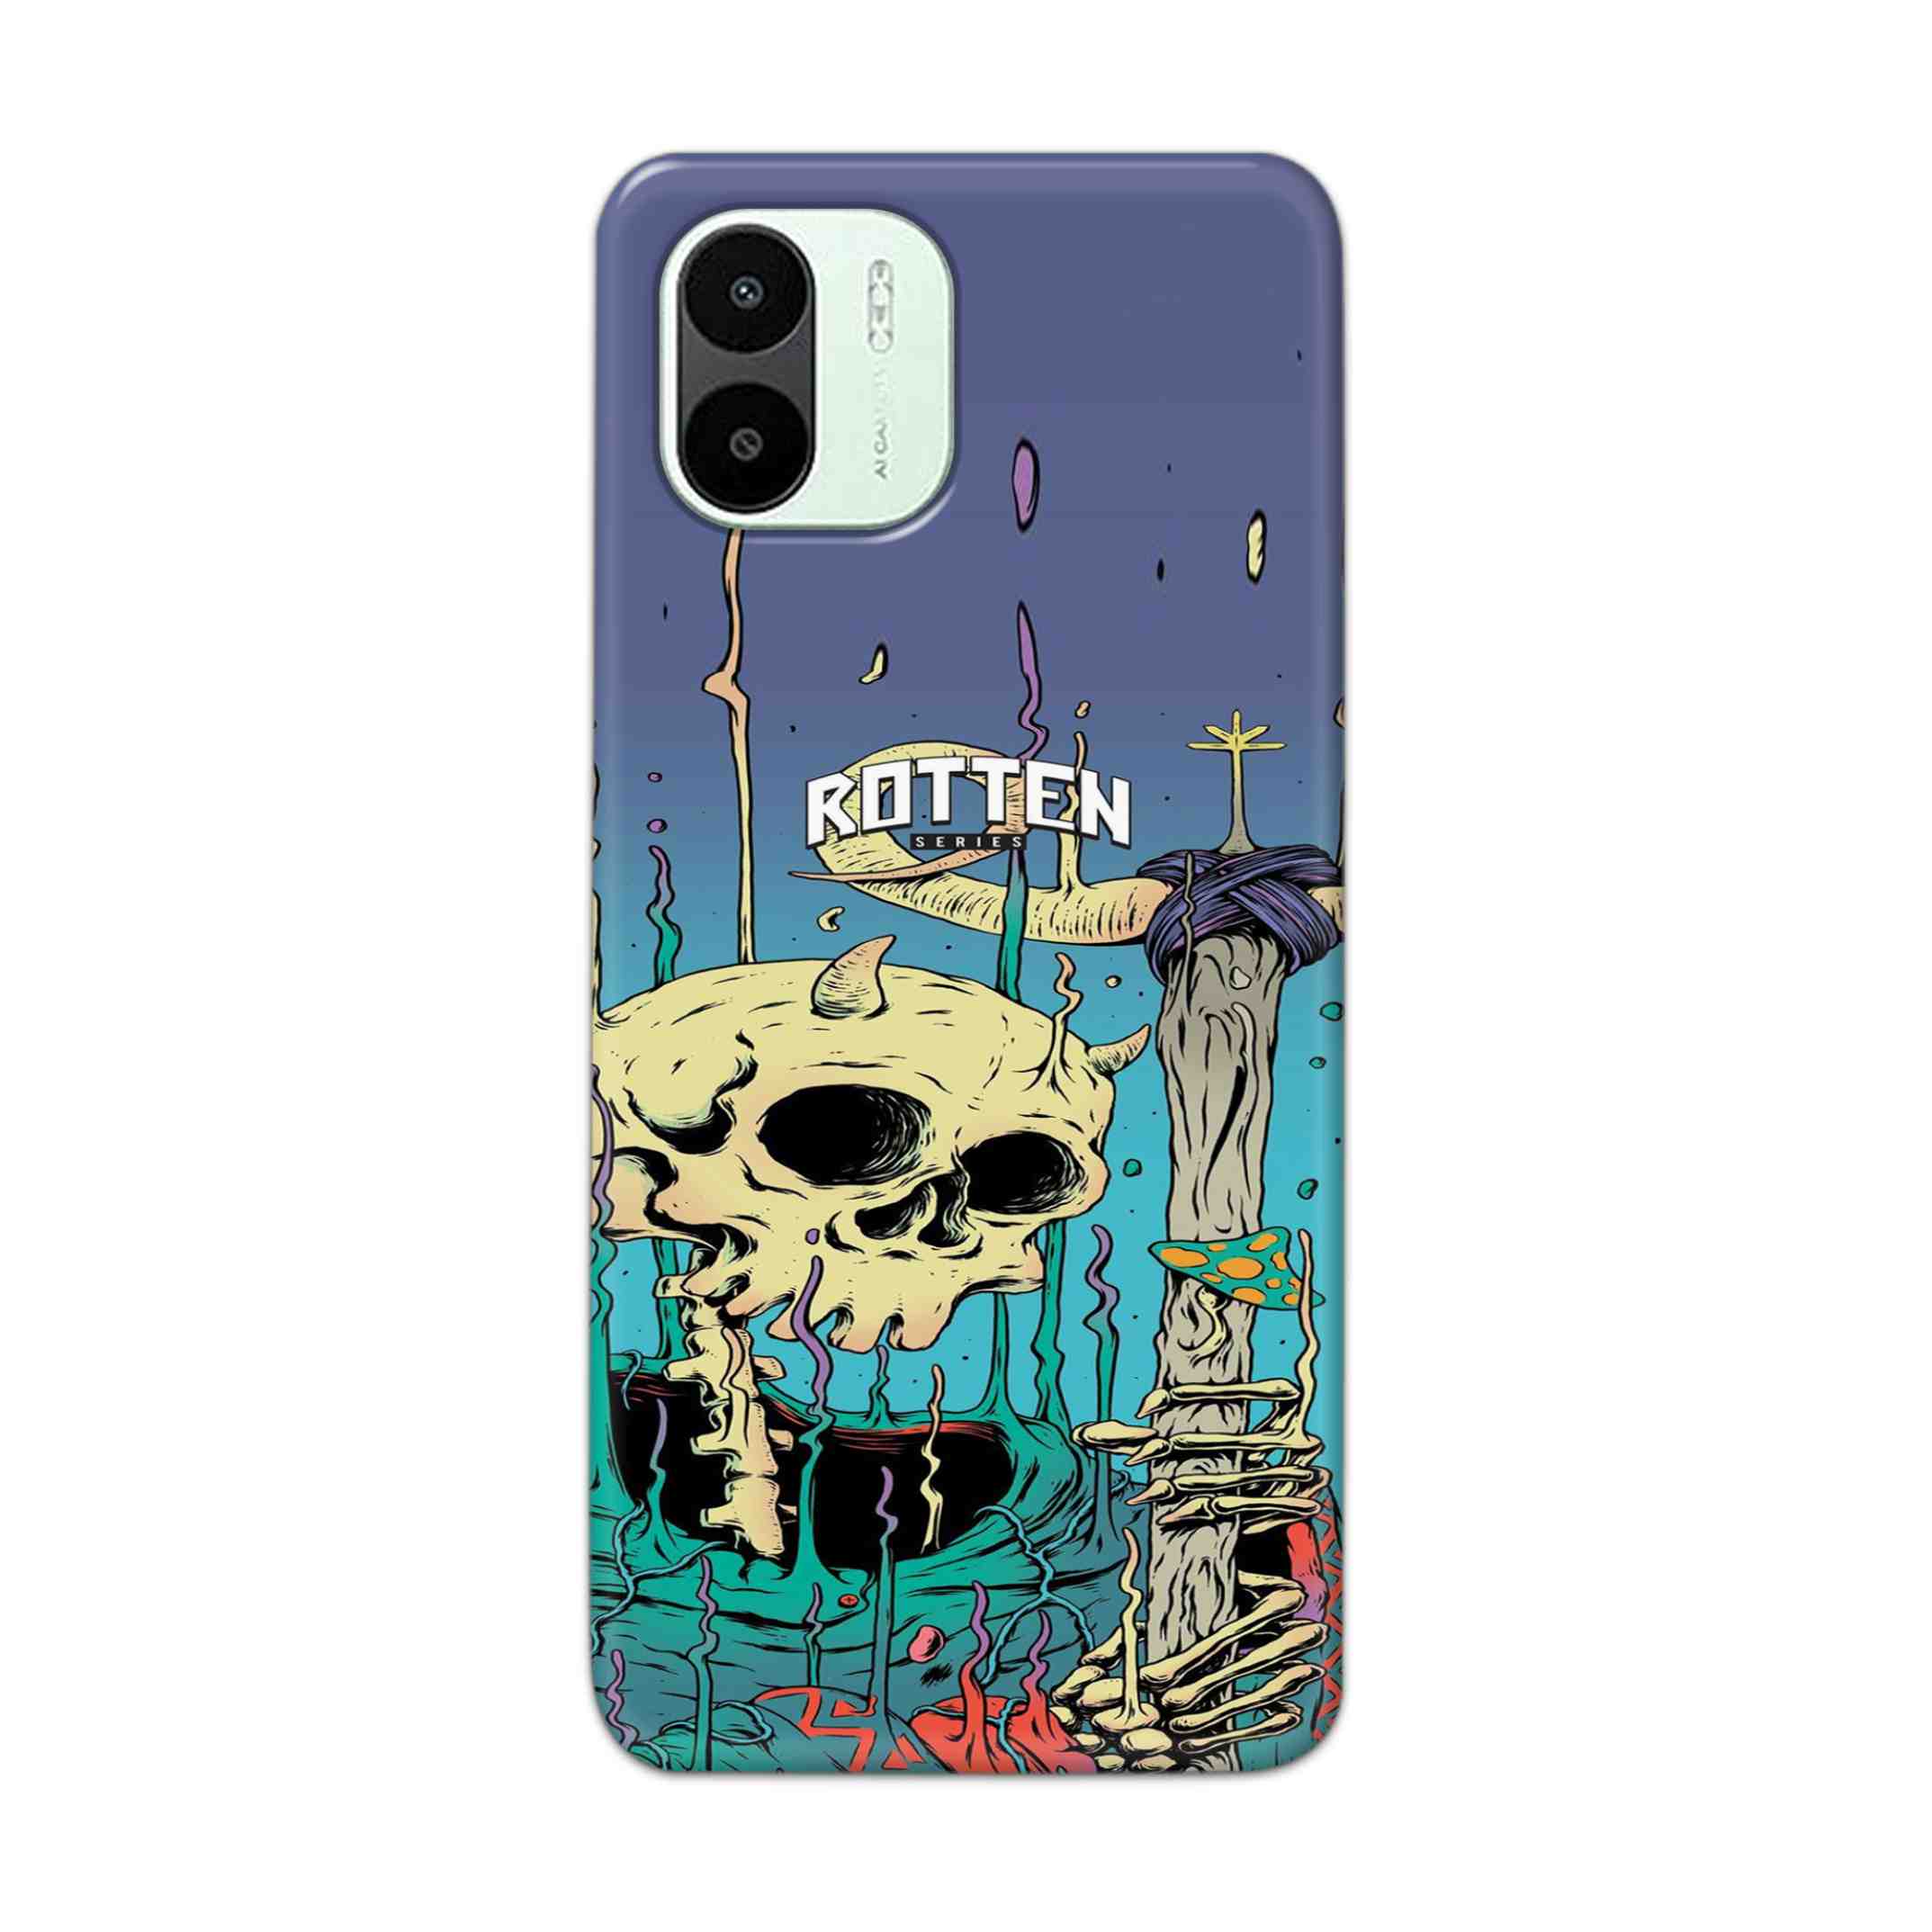 Buy Skull Hard Back Mobile Phone Case Cover For Xiaomi Redmi A1 5G Online